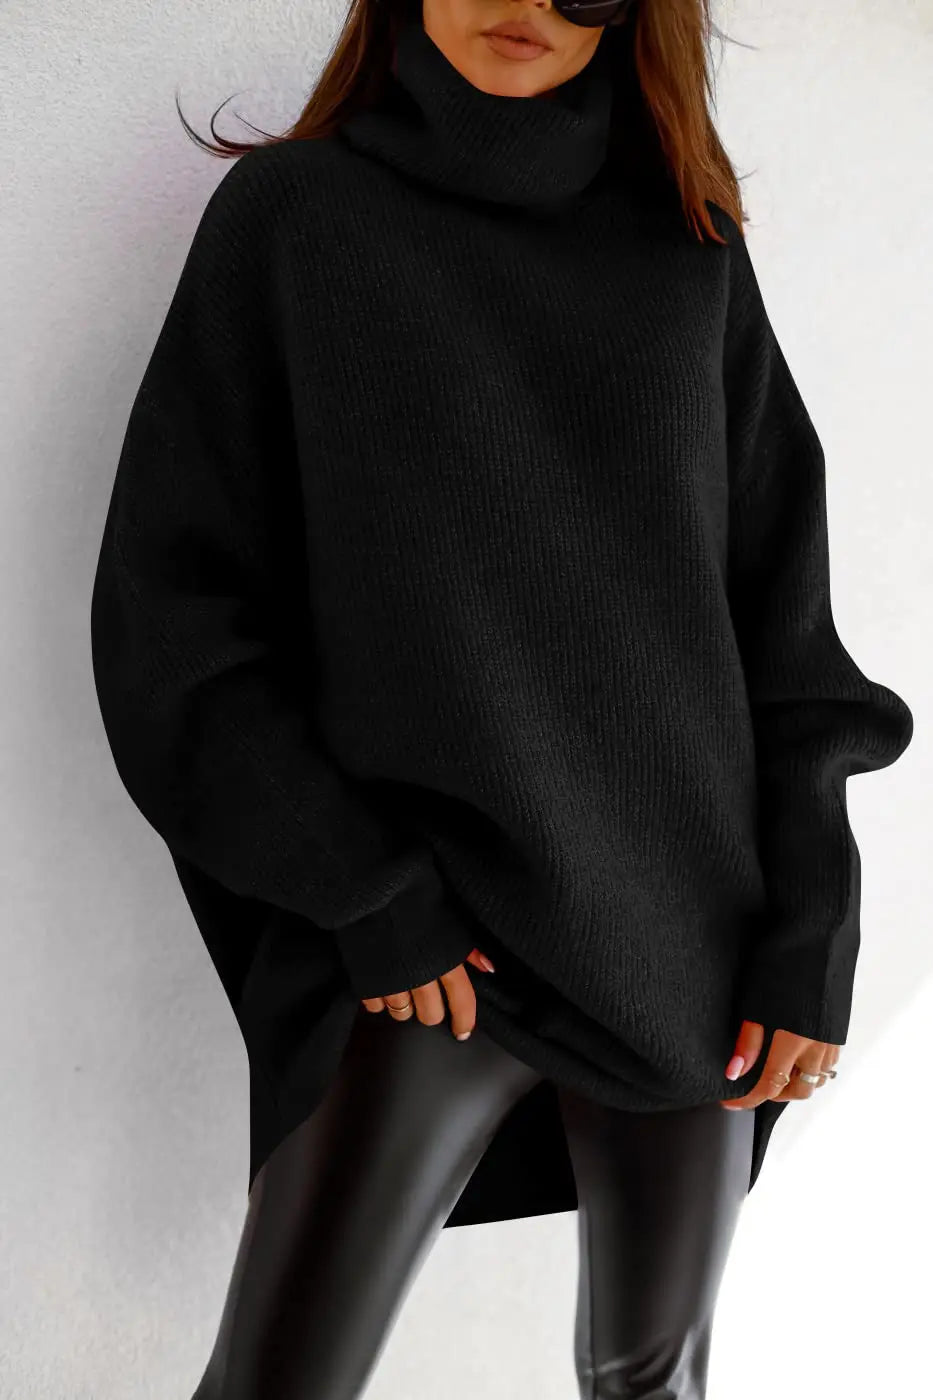 HOT Womens Turtleneck Oversized Sweater Batwing Chunky Pullover Sweater Casual Fall Knit Jumper Tunic Top